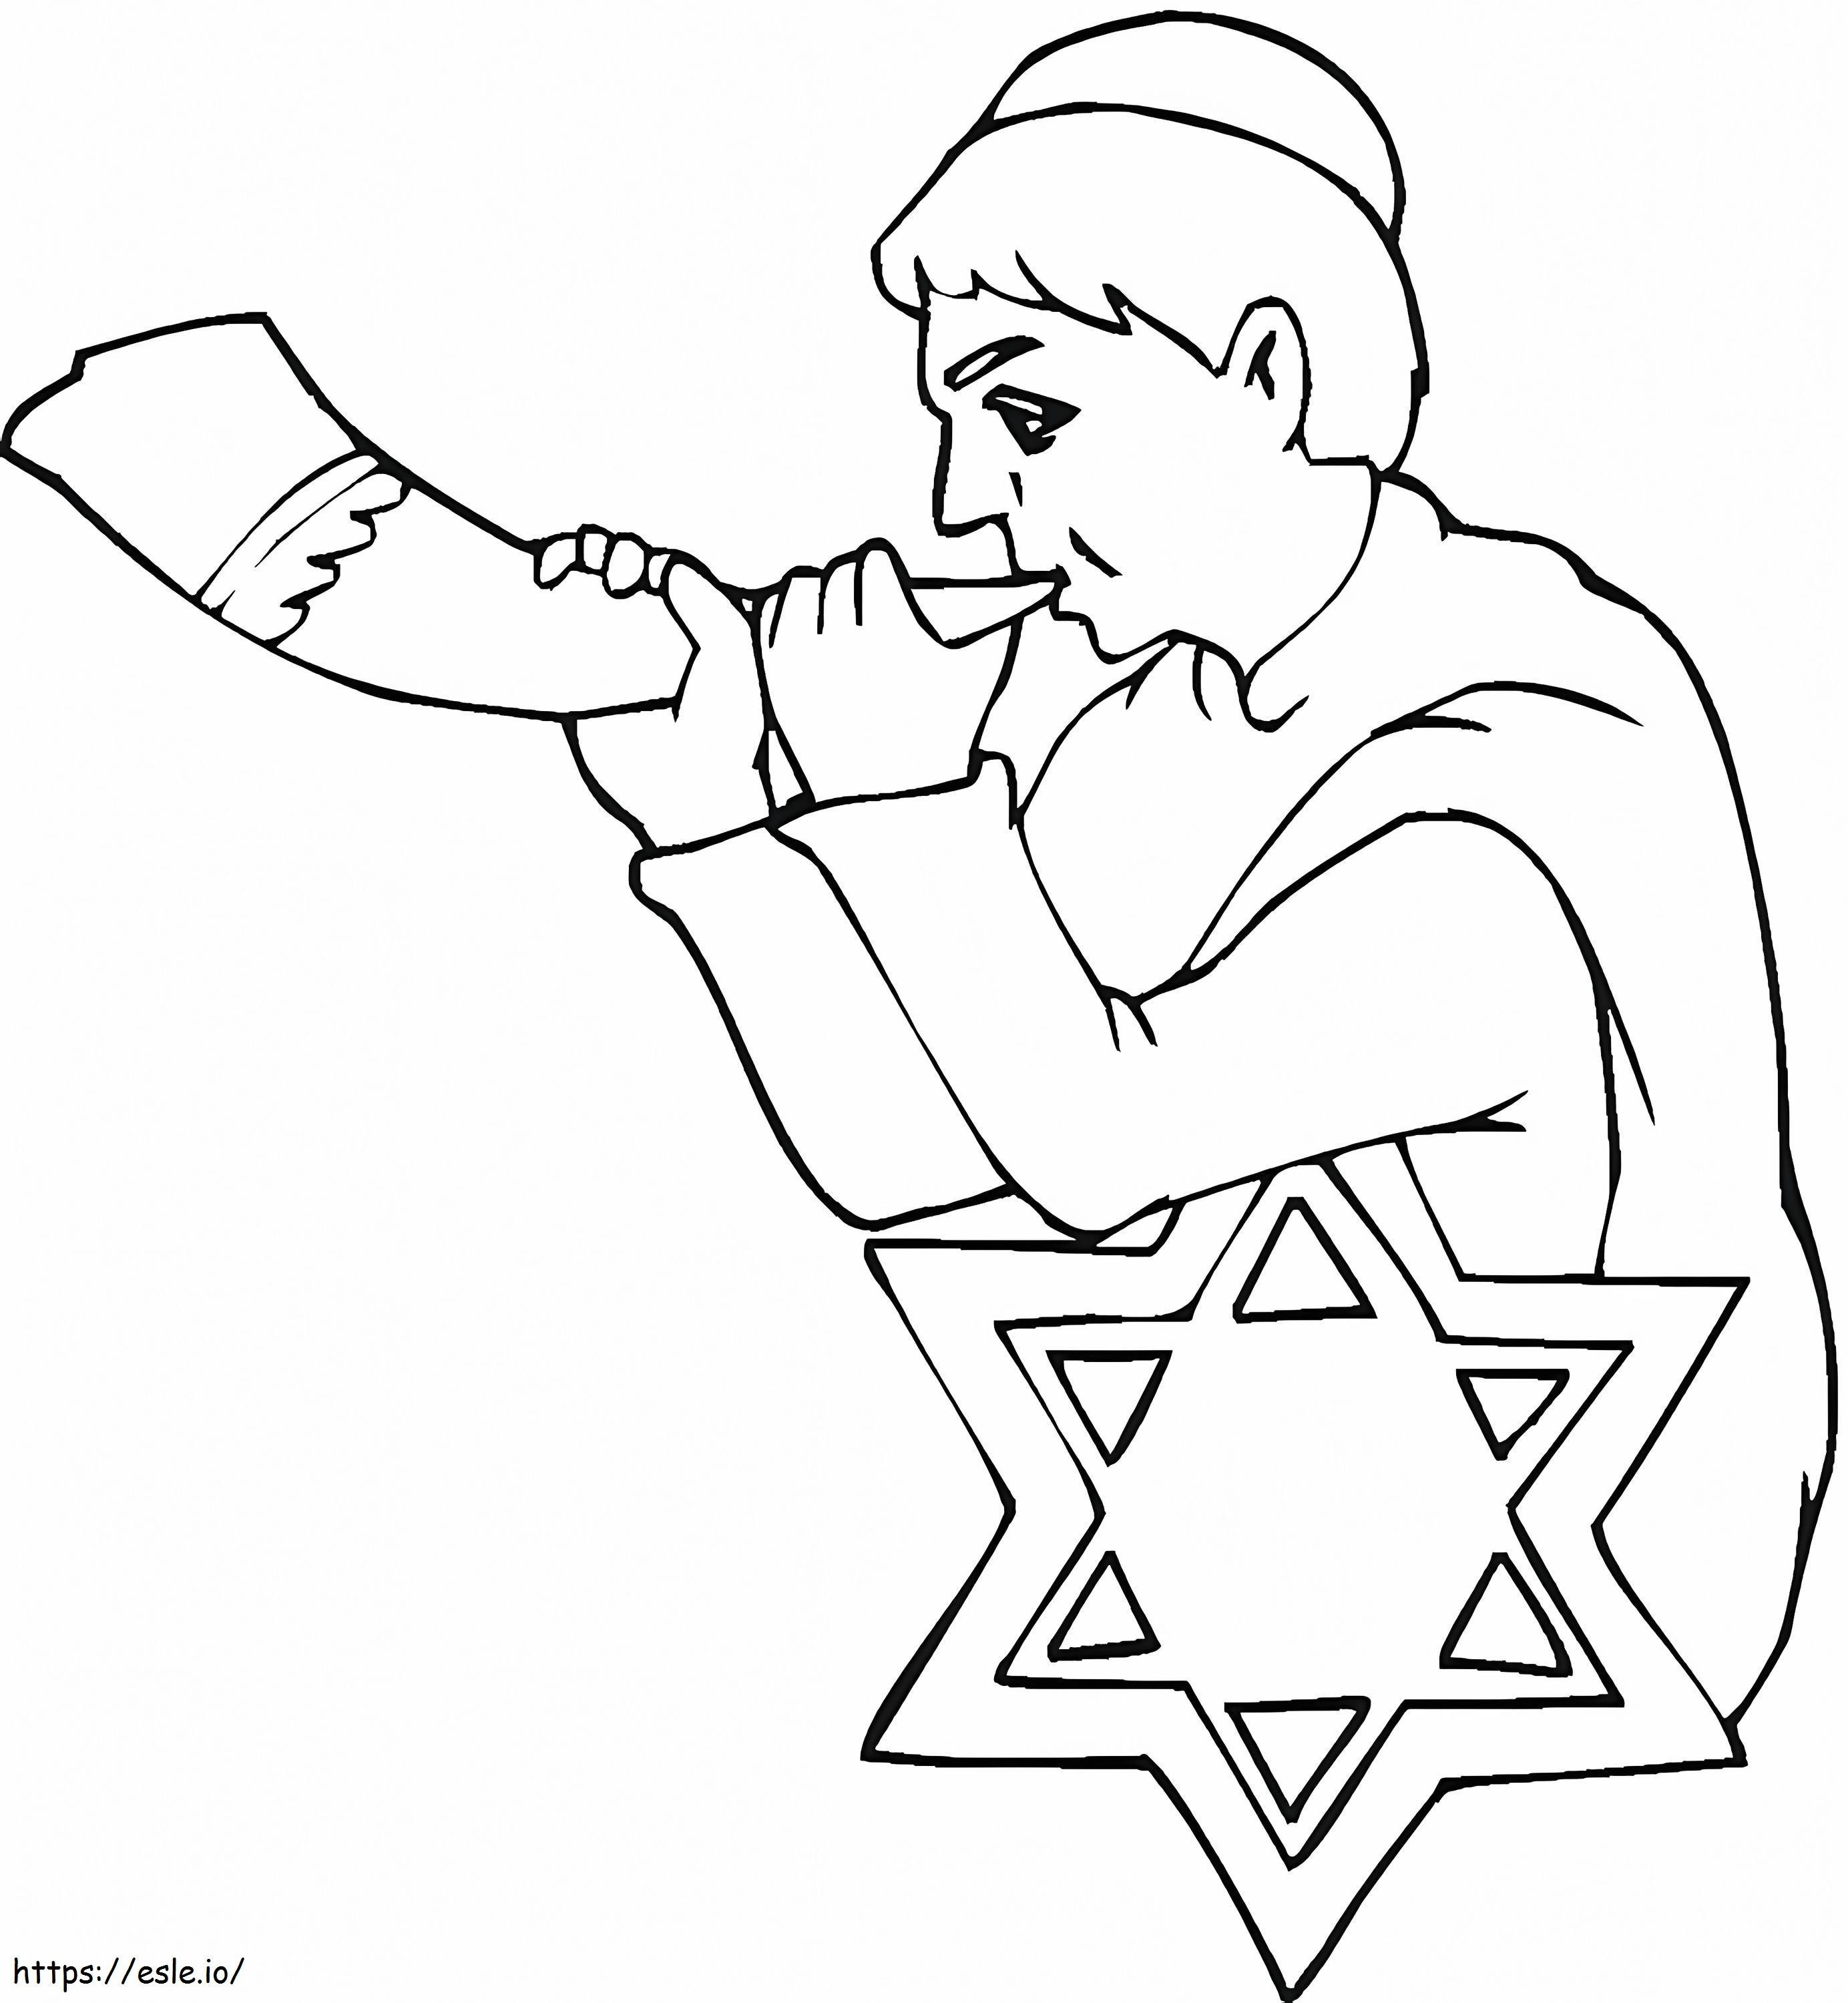 Boy With Shofar On Rosh Hashanah coloring page